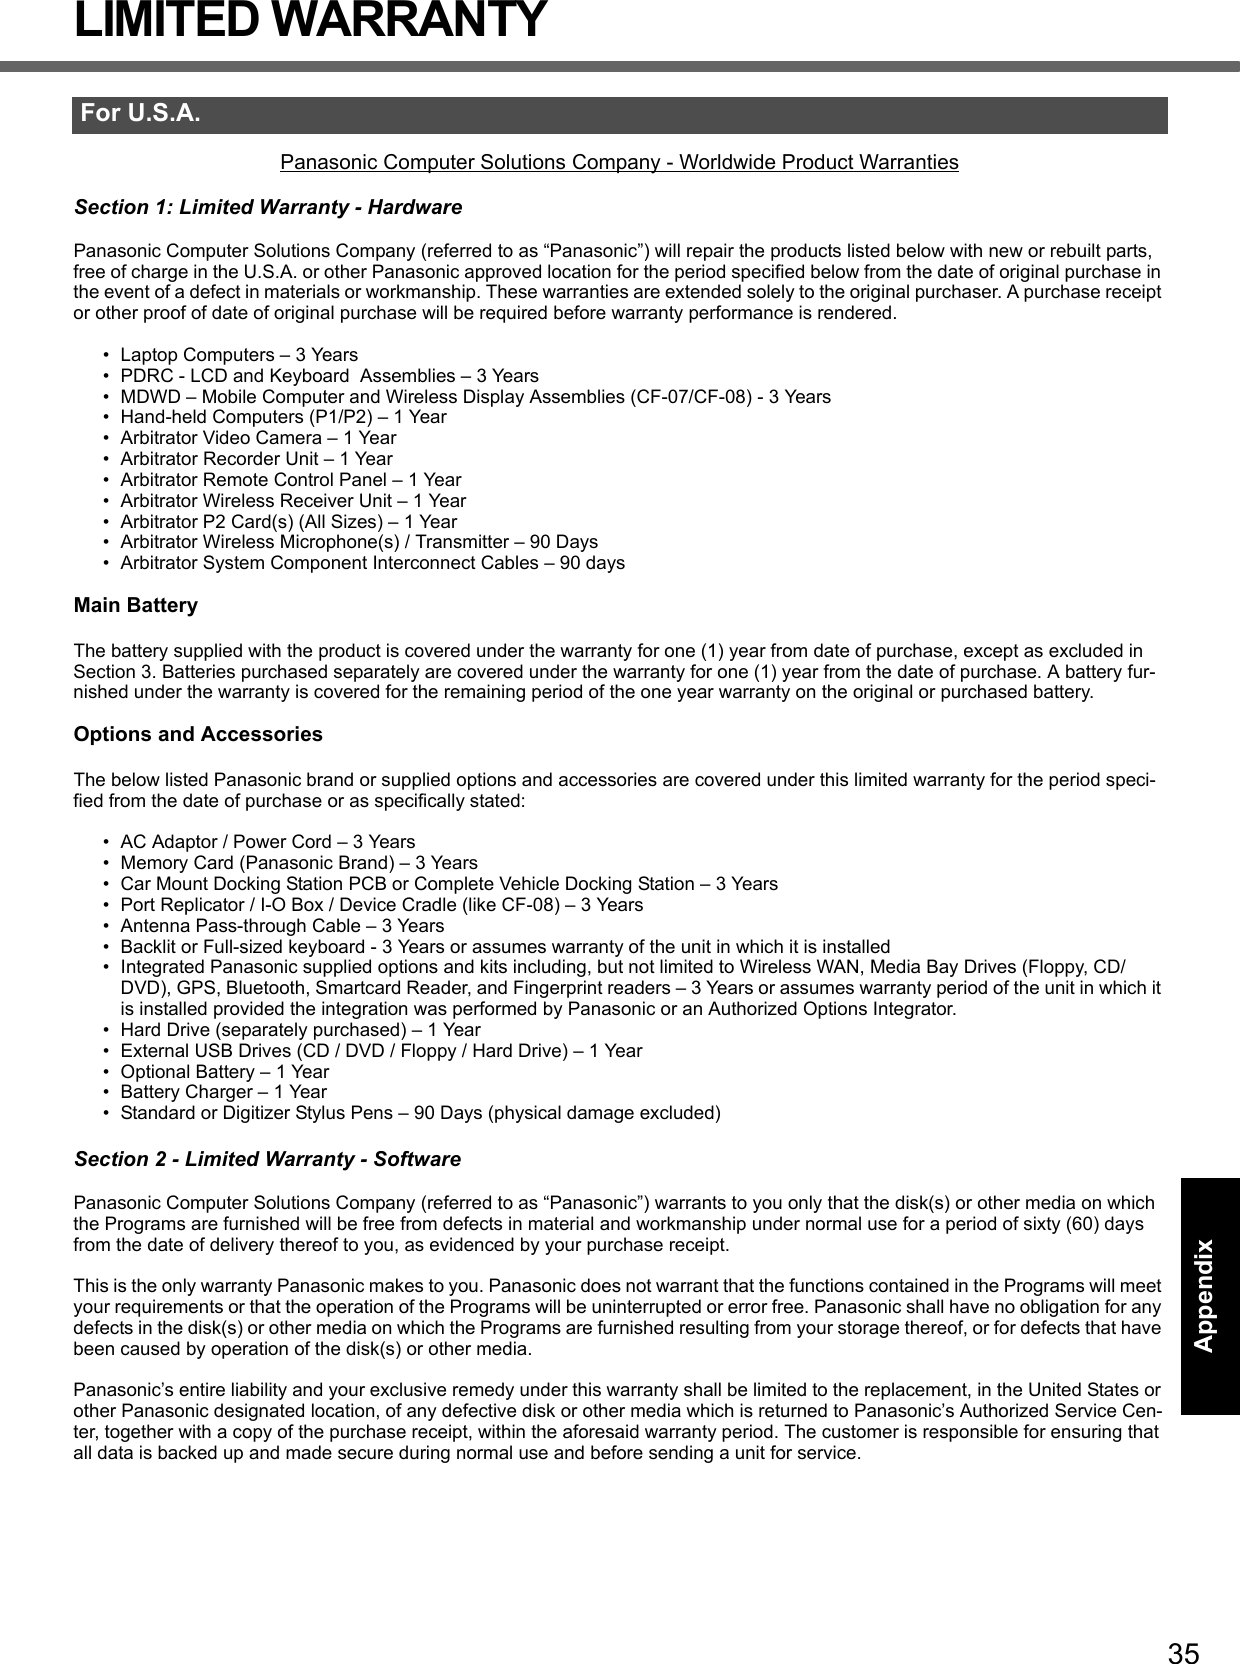 35Getting StartedUseful InformationTroubleshootingAppendixLIMITED WARRANTYPanasonic Computer Solutions Company - Worldwide Product WarrantiesSection 1: Limited Warranty - HardwarePanasonic Computer Solutions Company (referred to as “Panasonic”) will repair the products listed below with new or rebuilt parts, free of charge in the U.S.A. or other Panasonic approved location for the period specified below from the date of original purchase in the event of a defect in materials or workmanship. These warranties are extended solely to the original purchaser. A purchase receipt or other proof of date of original purchase will be required before warranty performance is rendered. • Laptop Computers – 3 Years• PDRC - LCD and Keyboard  Assemblies – 3 Years• MDWD – Mobile Computer and Wireless Display Assemblies (CF-07/CF-08) - 3 Years• Hand-held Computers (P1/P2) – 1 Year• Arbitrator Video Camera – 1 Year• Arbitrator Recorder Unit – 1 Year• Arbitrator Remote Control Panel – 1 Year• Arbitrator Wireless Receiver Unit – 1 Year• Arbitrator P2 Card(s) (All Sizes) – 1 Year• Arbitrator Wireless Microphone(s) / Transmitter – 90 Days• Arbitrator System Component Interconnect Cables – 90 daysMain BatteryThe battery supplied with the product is covered under the warranty for one (1) year from date of purchase, except as excluded in Section 3. Batteries purchased separately are covered under the warranty for one (1) year from the date of purchase. A battery fur-nished under the warranty is covered for the remaining period of the one year warranty on the original or purchased battery.Options and AccessoriesThe below listed Panasonic brand or supplied options and accessories are covered under this limited warranty for the period speci-fied from the date of purchase or as specifically stated:• AC Adaptor / Power Cord – 3 Years• Memory Card (Panasonic Brand) – 3 Years • Car Mount Docking Station PCB or Complete Vehicle Docking Station – 3 Years• Port Replicator / I-O Box / Device Cradle (like CF-08) – 3 Years• Antenna Pass-through Cable – 3 Years• Backlit or Full-sized keyboard - 3 Years or assumes warranty of the unit in which it is installed• Integrated Panasonic supplied options and kits including, but not limited to Wireless WAN, Media Bay Drives (Floppy, CD/DVD), GPS, Bluetooth, Smartcard Reader, and Fingerprint readers – 3 Years or assumes warranty period of the unit in which it is installed provided the integration was performed by Panasonic or an Authorized Options Integrator.• Hard Drive (separately purchased) – 1 Year• External USB Drives (CD / DVD / Floppy / Hard Drive) – 1 Year• Optional Battery – 1 Year• Battery Charger – 1 Year• Standard or Digitizer Stylus Pens – 90 Days (physical damage excluded)Section 2 - Limited Warranty - SoftwarePanasonic Computer Solutions Company (referred to as “Panasonic”) warrants to you only that the disk(s) or other media on which the Programs are furnished will be free from defects in material and workmanship under normal use for a period of sixty (60) days from the date of delivery thereof to you, as evidenced by your purchase receipt.This is the only warranty Panasonic makes to you. Panasonic does not warrant that the functions contained in the Programs will meet your requirements or that the operation of the Programs will be uninterrupted or error free. Panasonic shall have no obligation for any defects in the disk(s) or other media on which the Programs are furnished resulting from your storage thereof, or for defects that have been caused by operation of the disk(s) or other media.Panasonic’s entire liability and your exclusive remedy under this warranty shall be limited to the replacement, in the United States or other Panasonic designated location, of any defective disk or other media which is returned to Panasonic’s Authorized Service Cen-ter, together with a copy of the purchase receipt, within the aforesaid warranty period. The customer is responsible for ensuring that all data is backed up and made secure during normal use and before sending a unit for service. For U.S.A.